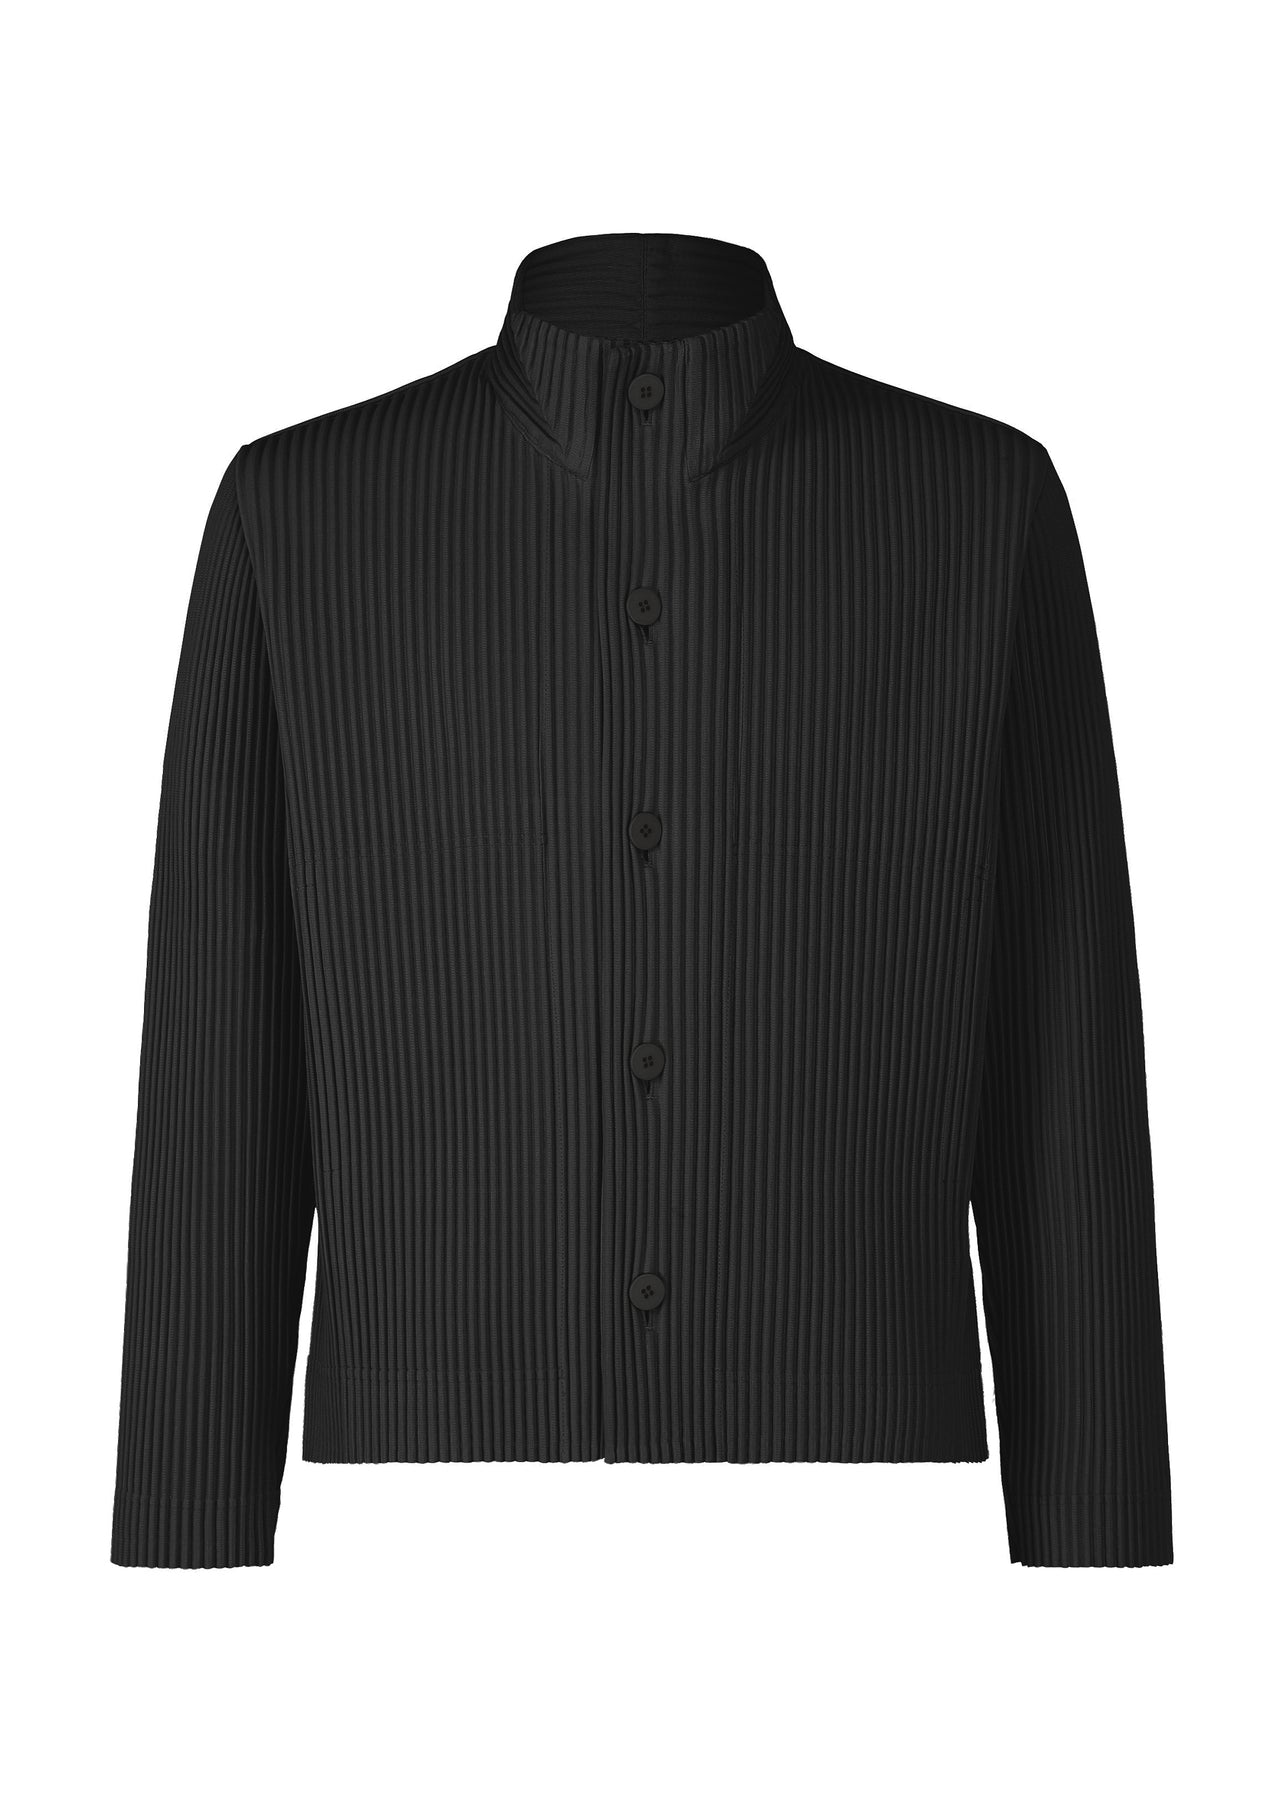 TAILORED PLEATS 1 JACKET | The official ISSEY MIYAKE ONLINE STORE